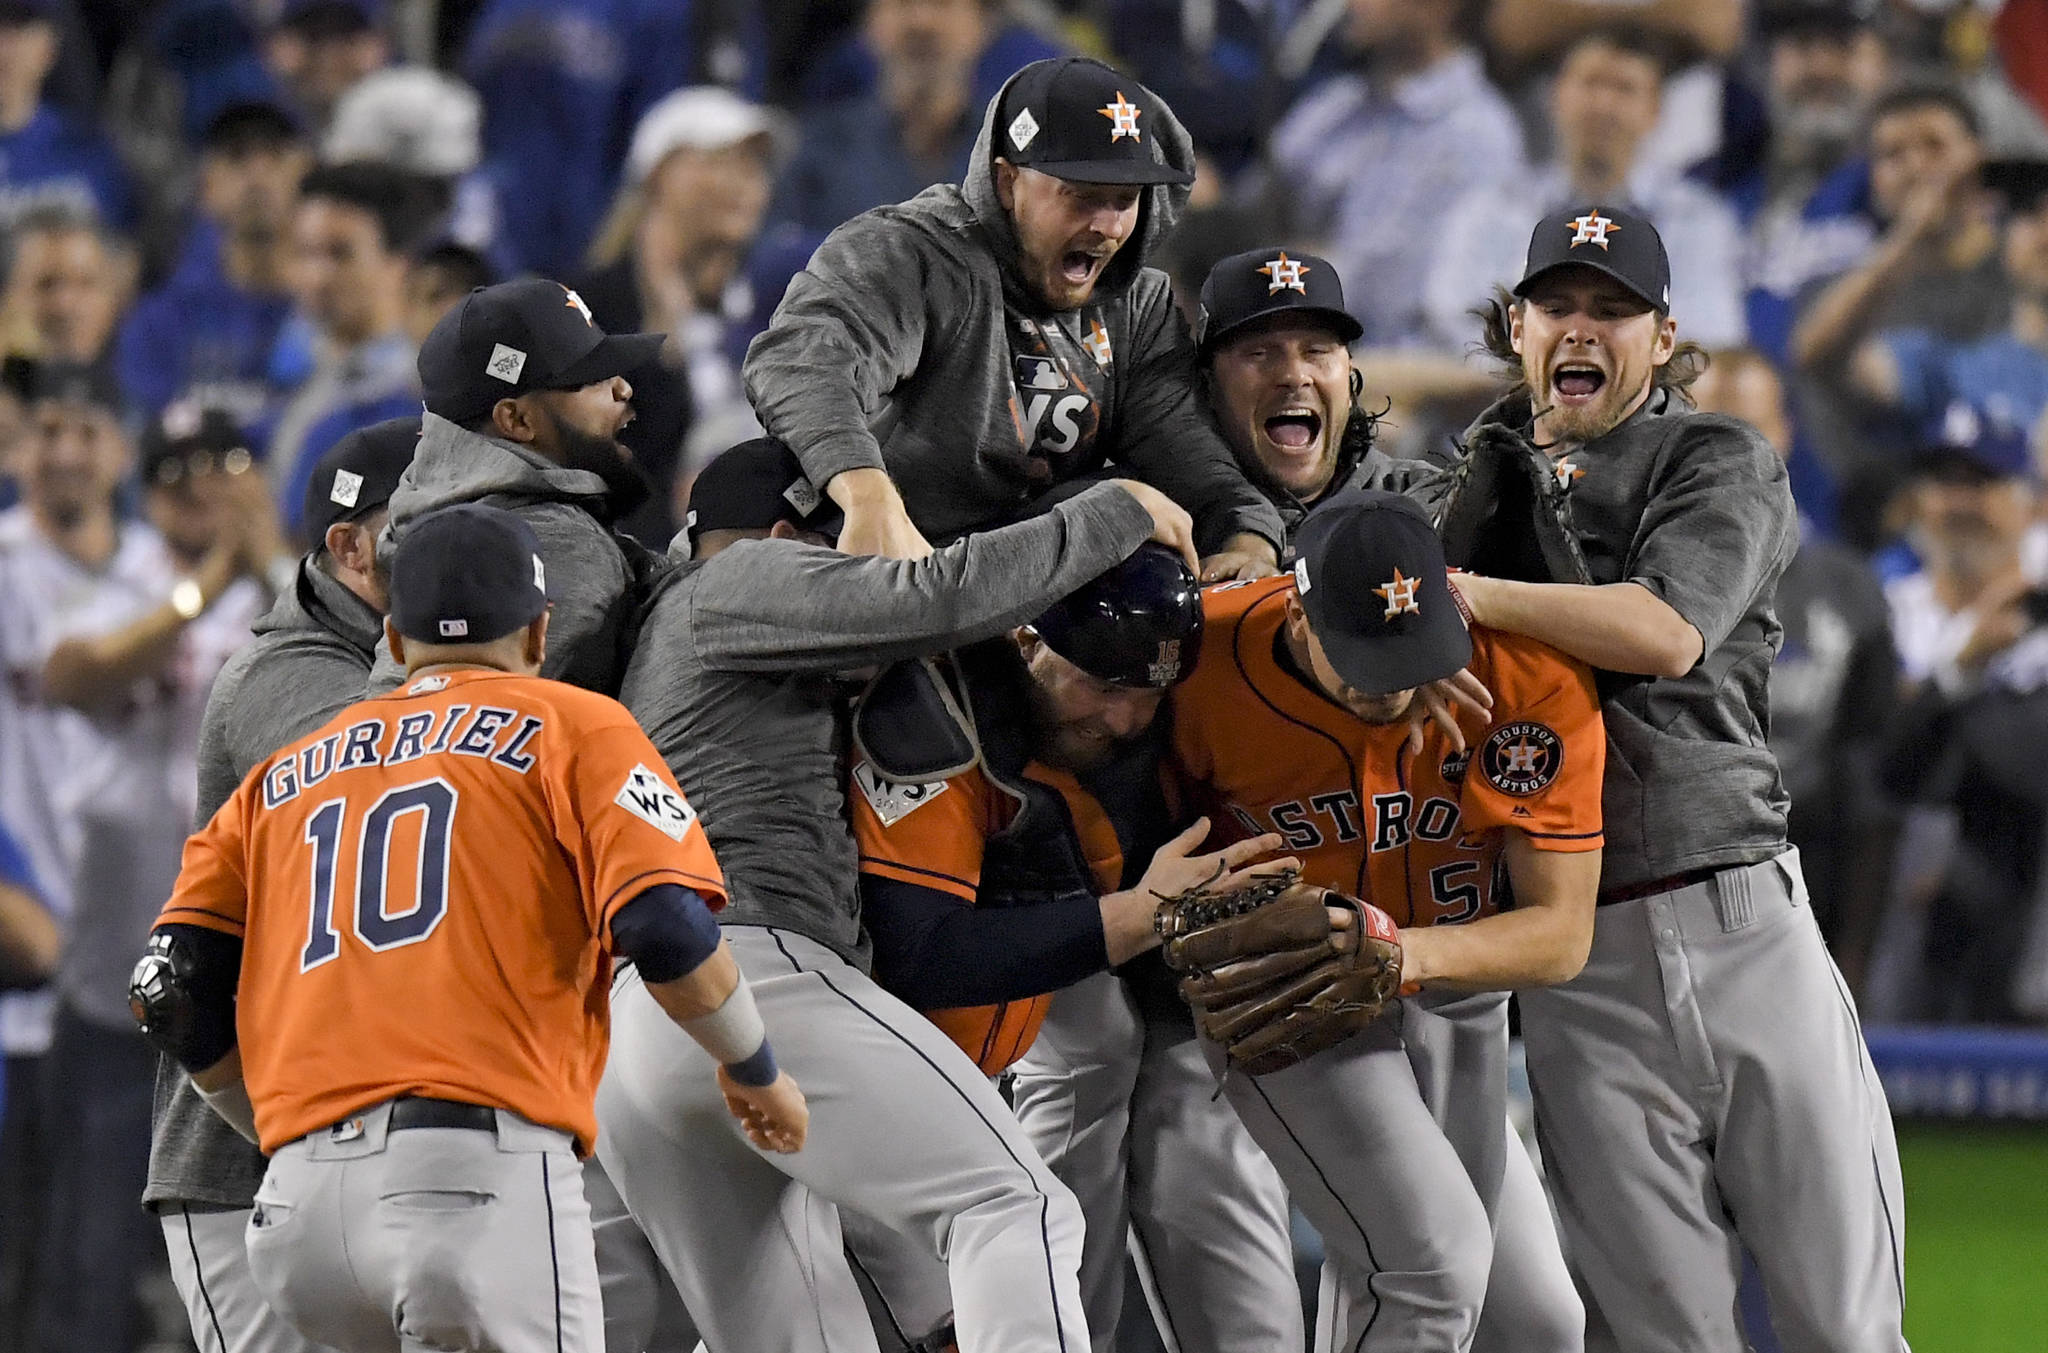 The Houston Astros celebrate after their win against the Los Angeles Dodgers in Game 7 of baseball’s World Series Wednesday, Nov. 1, 2017, in Los Angeles. The Astros won 5-1 to win the series 4-3. (Mark J. Terrill | The Associated Press)